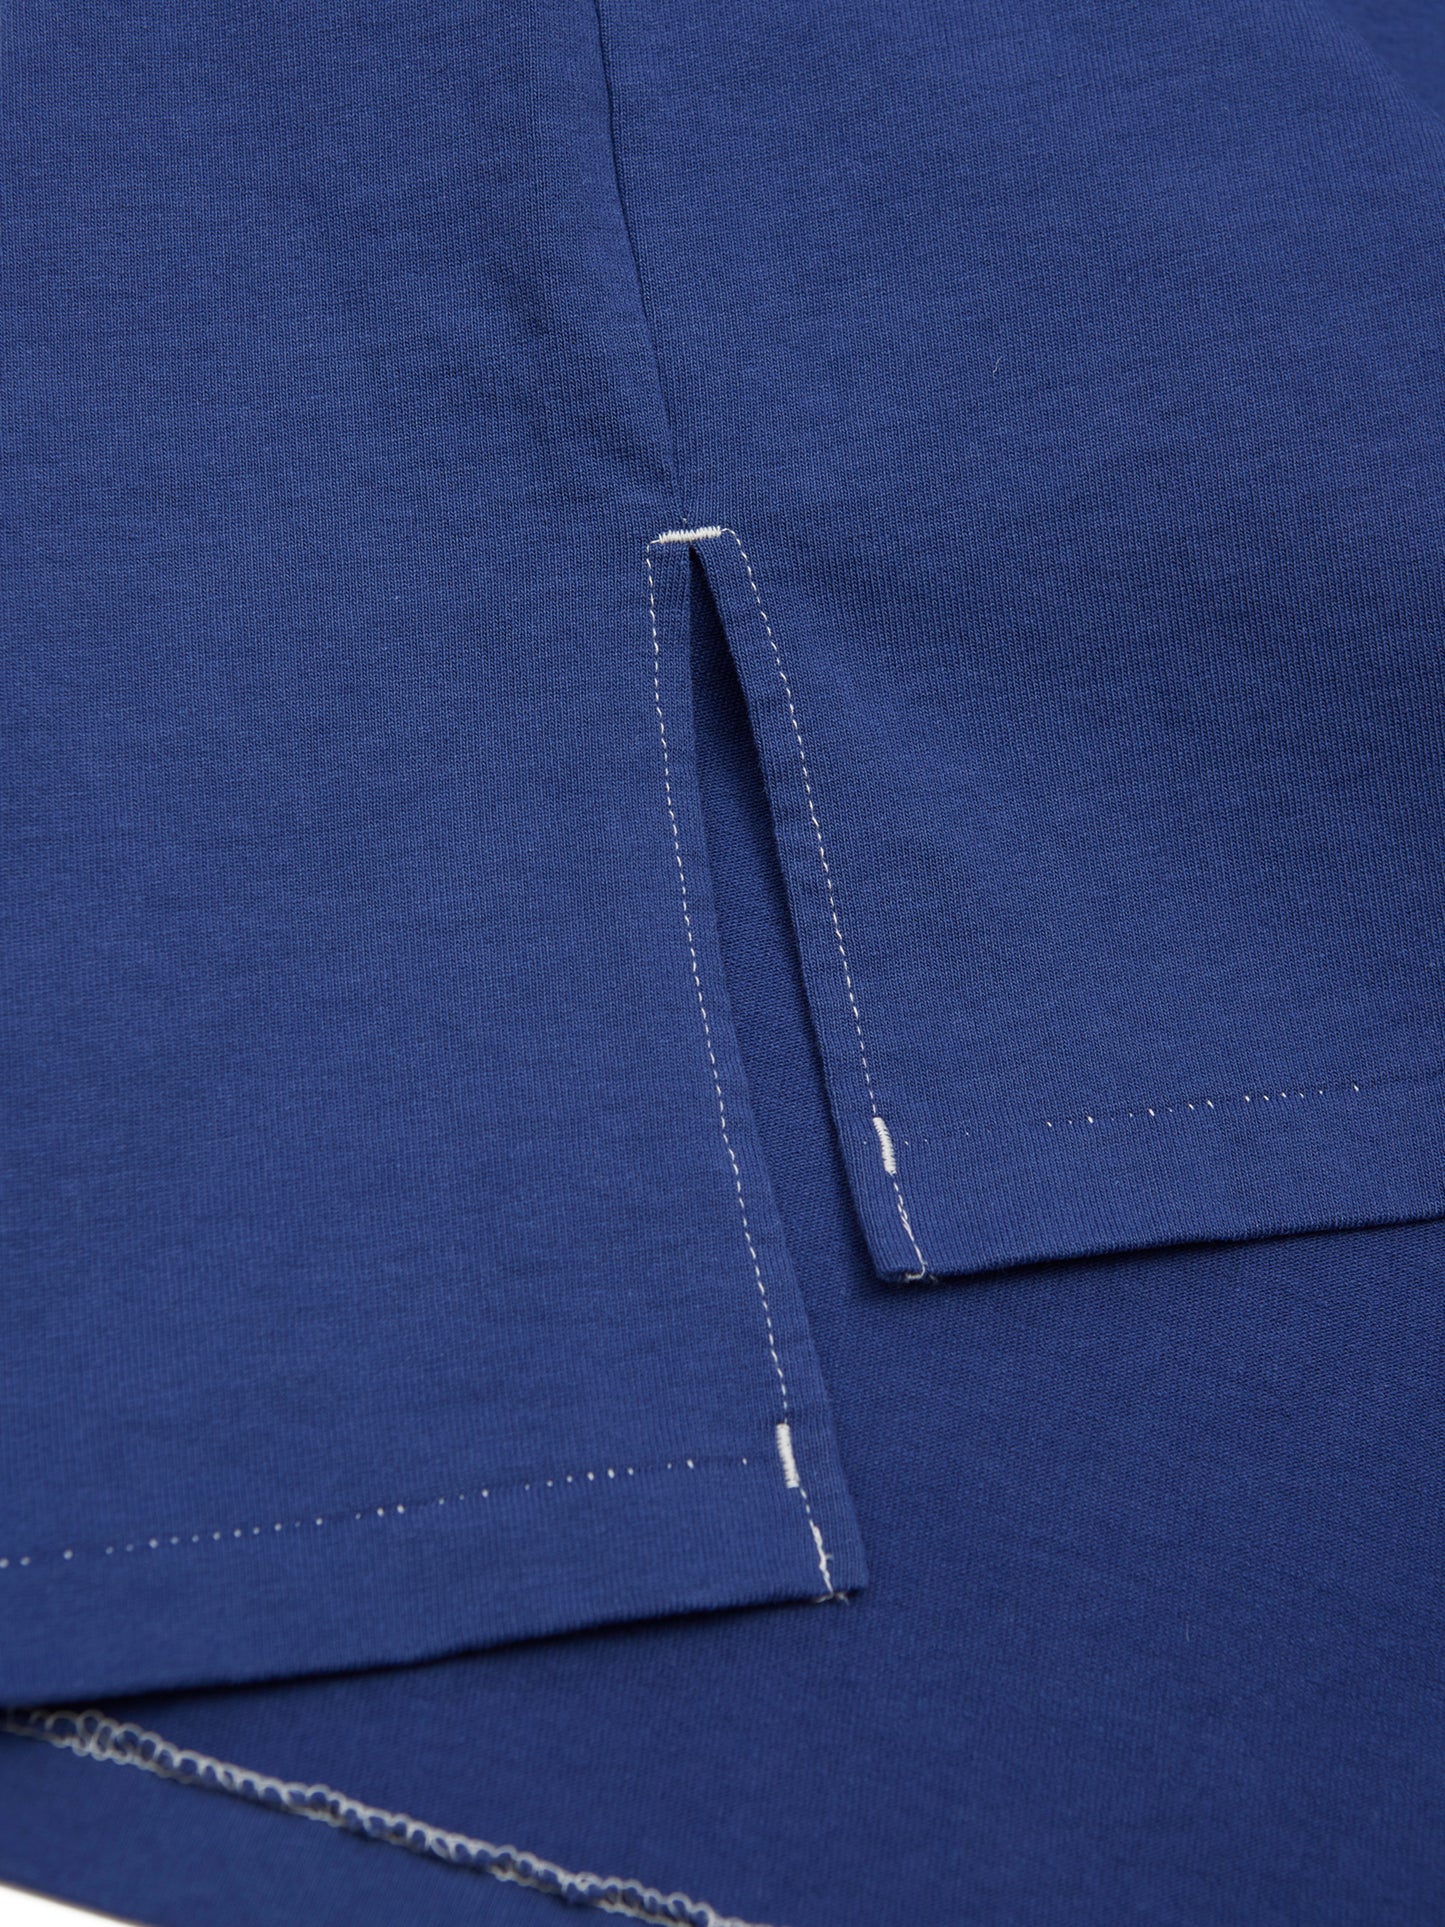 BAGGY BOAT S/S TEE COTTON JERSEY AM-C0206 Blue